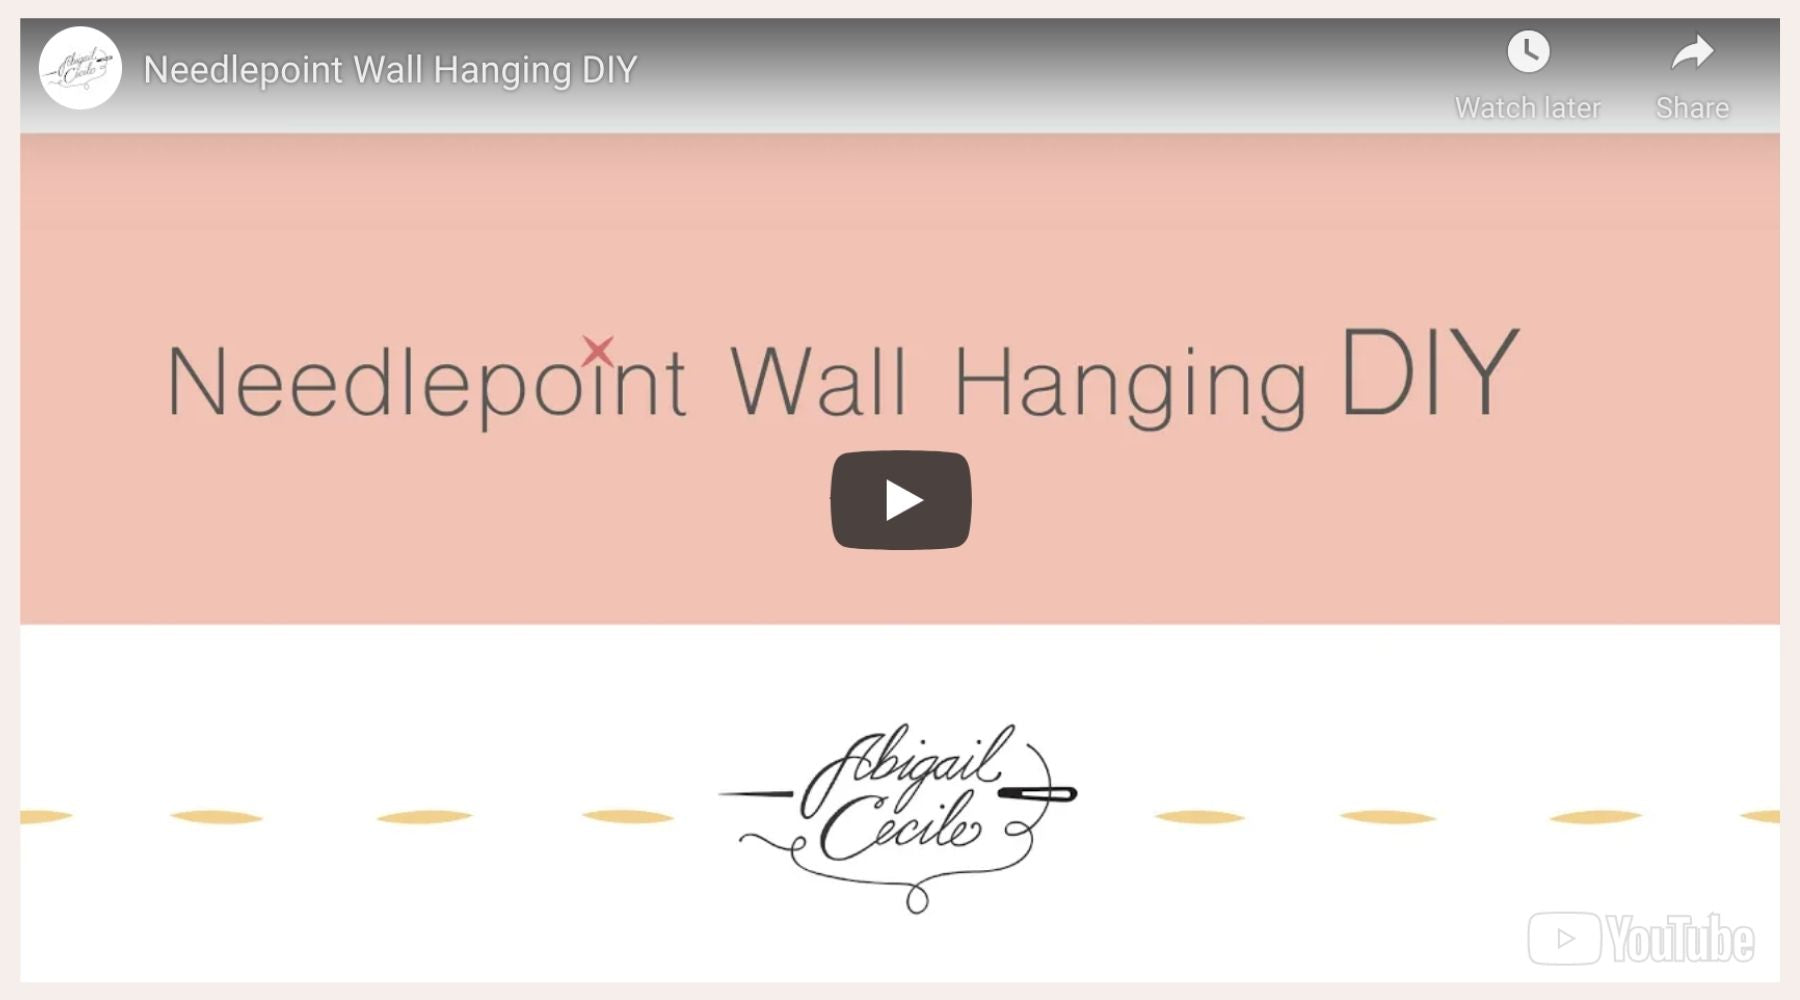 Opening slide of the video titled Needlepoint Wall Hanging DIY.